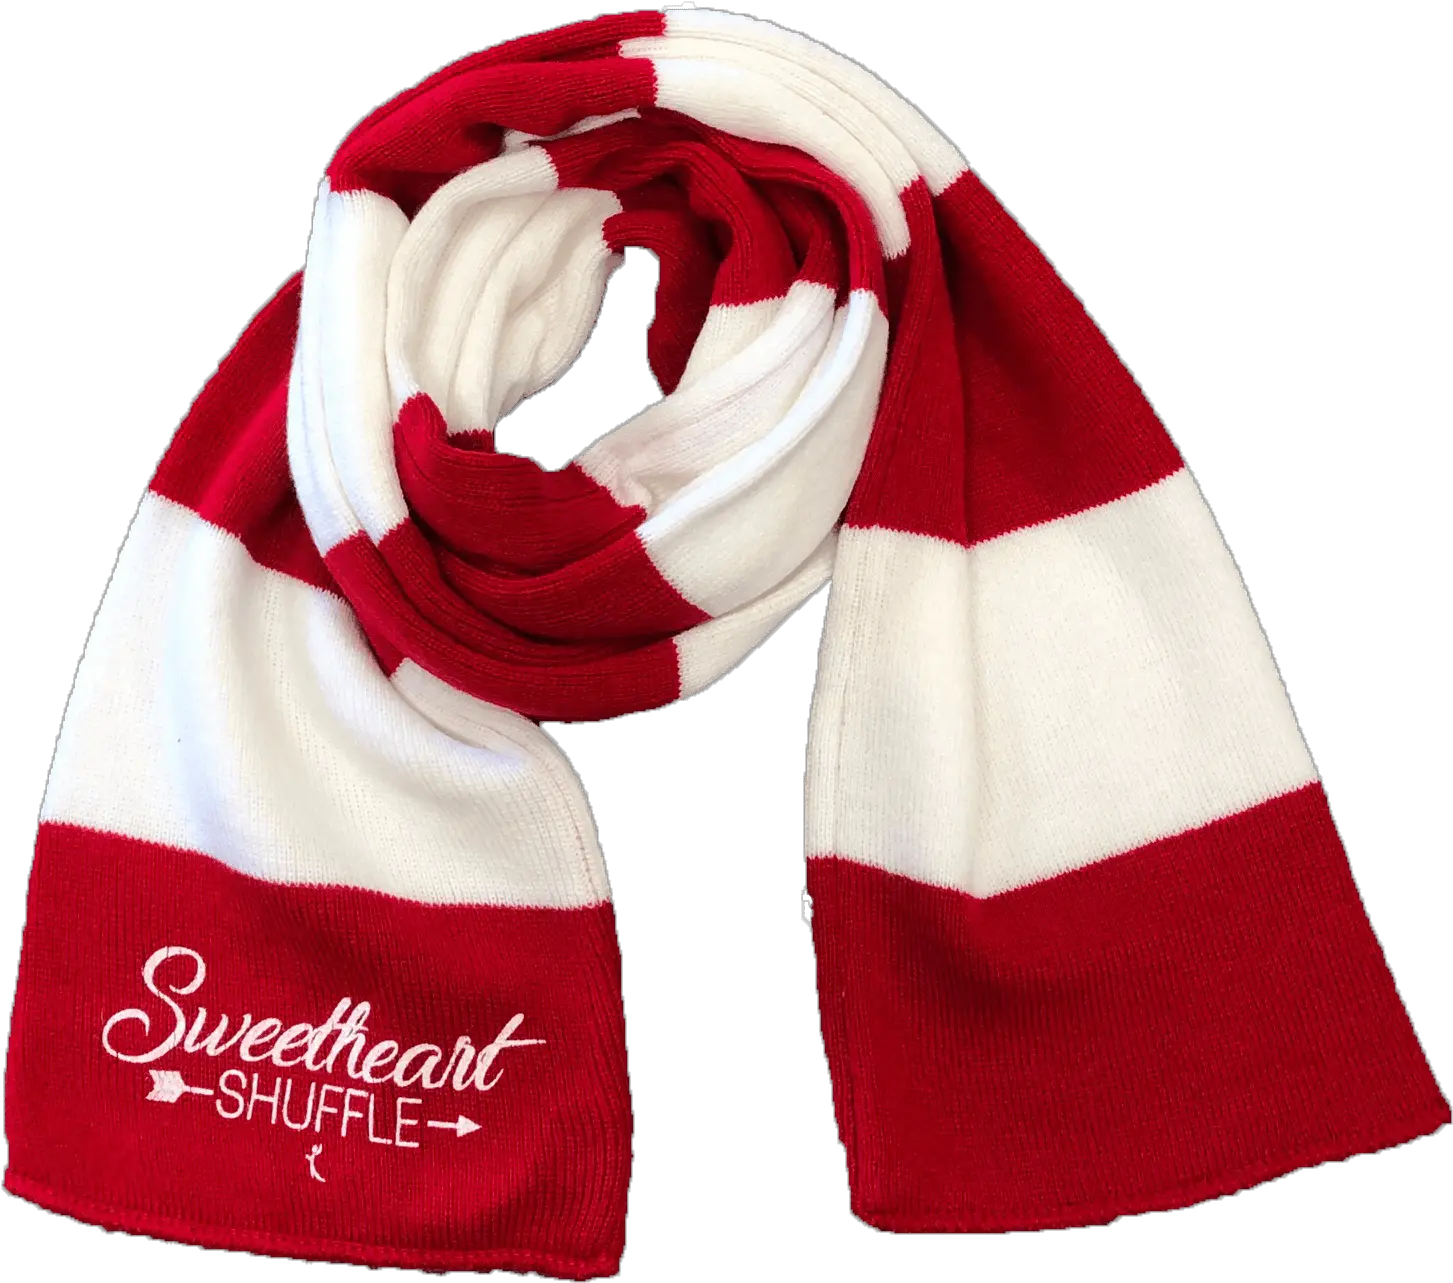 Sweetheart Shuffle Striped Scarf Scarf Png Scarf Png